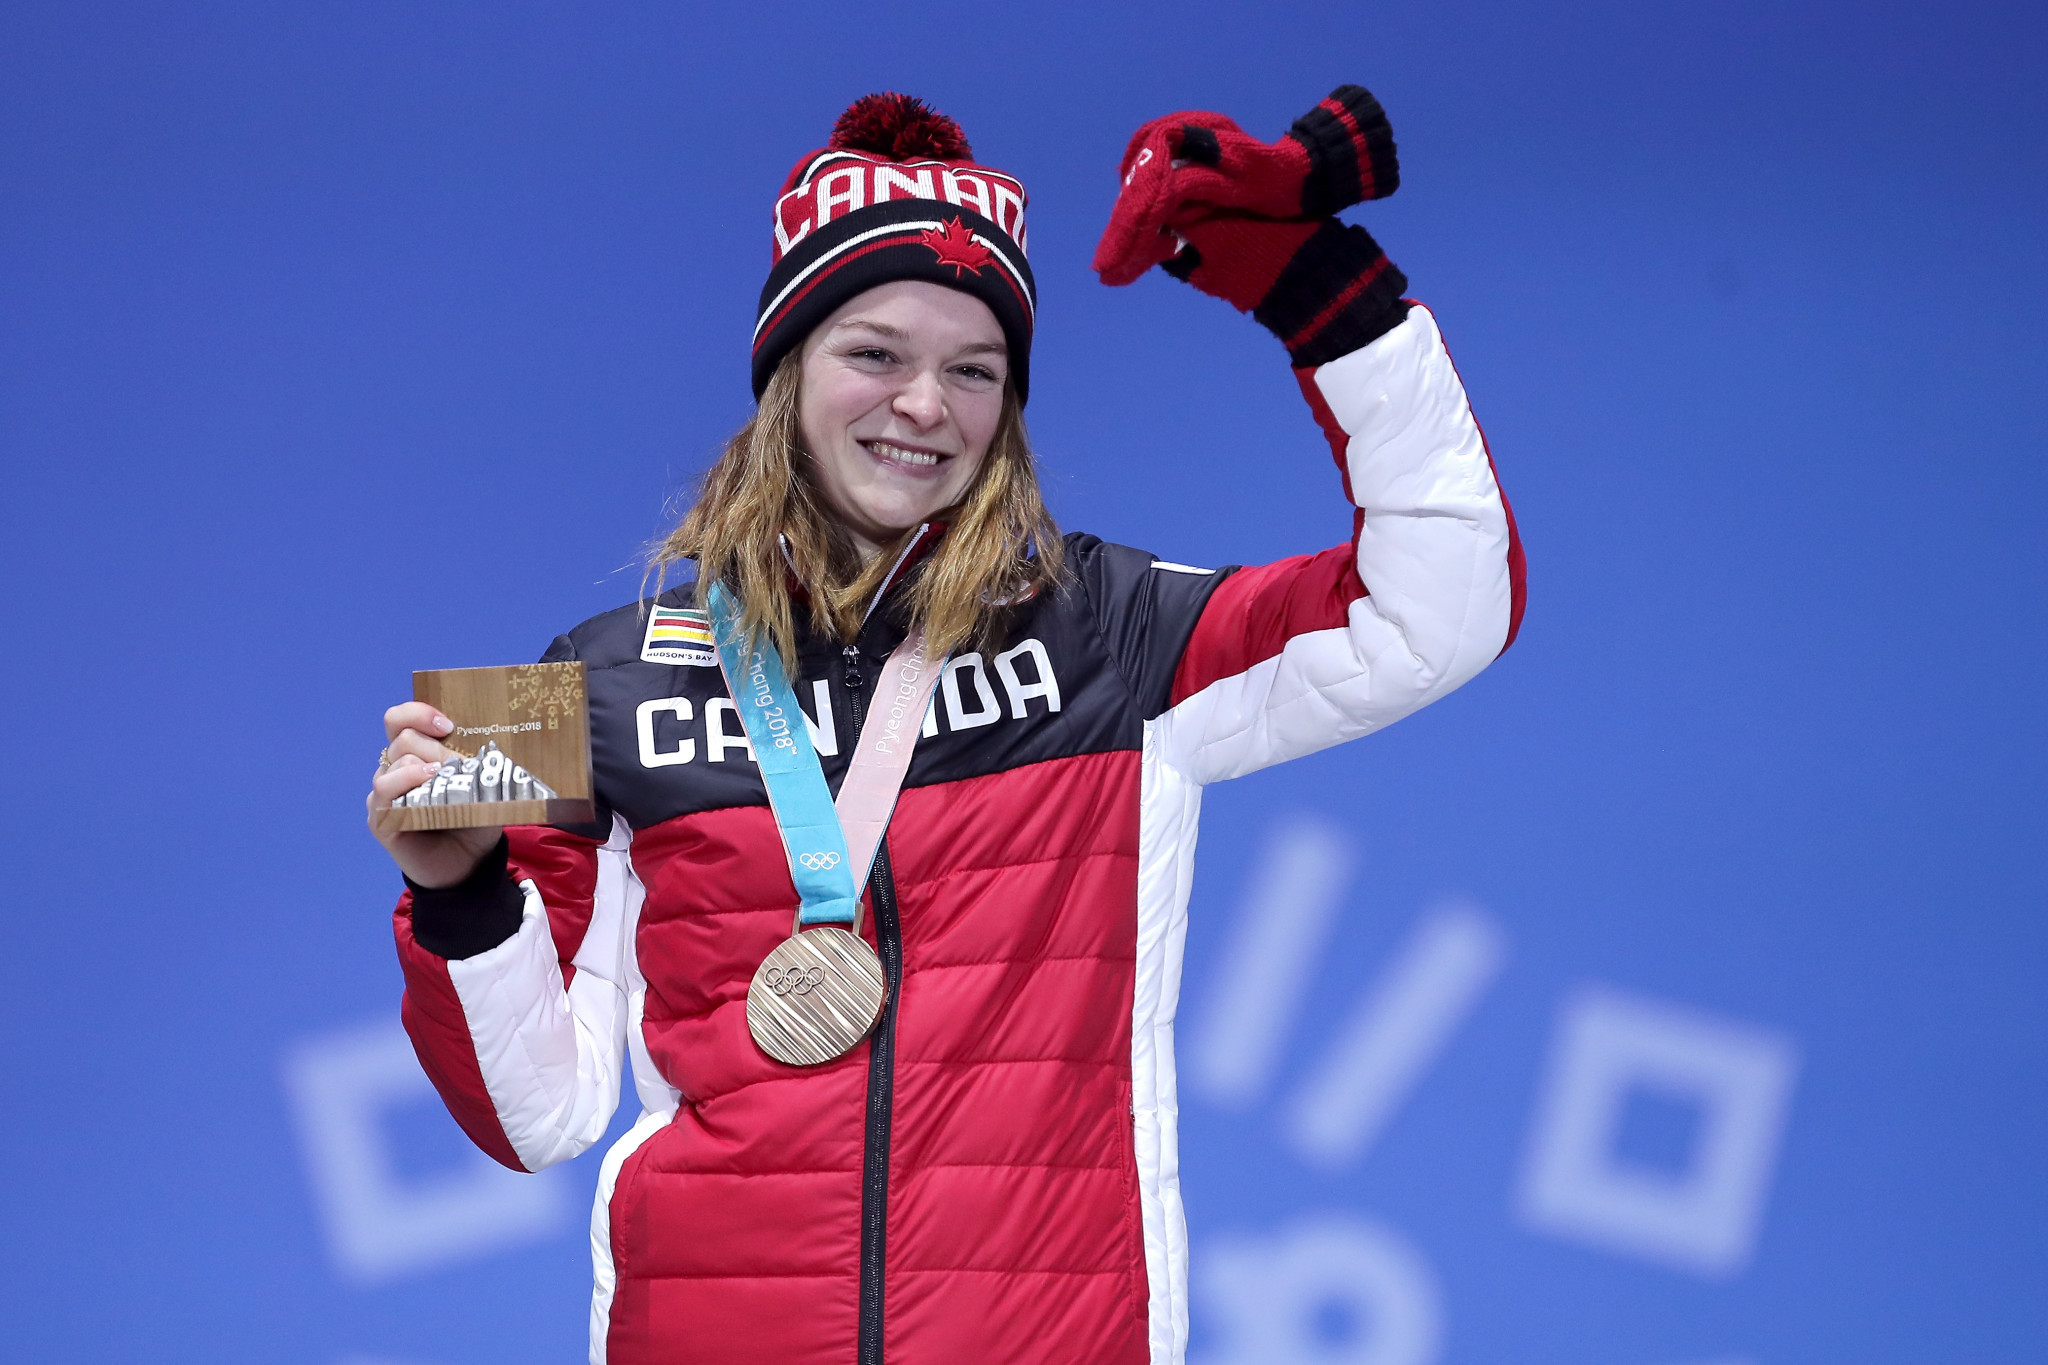 Canada's Kim Boutin was subjected to online threats after winning a medal at the expense of a disqualified South Korean in the short track speed skating at Pyeongchang 2018 ©Getty Images